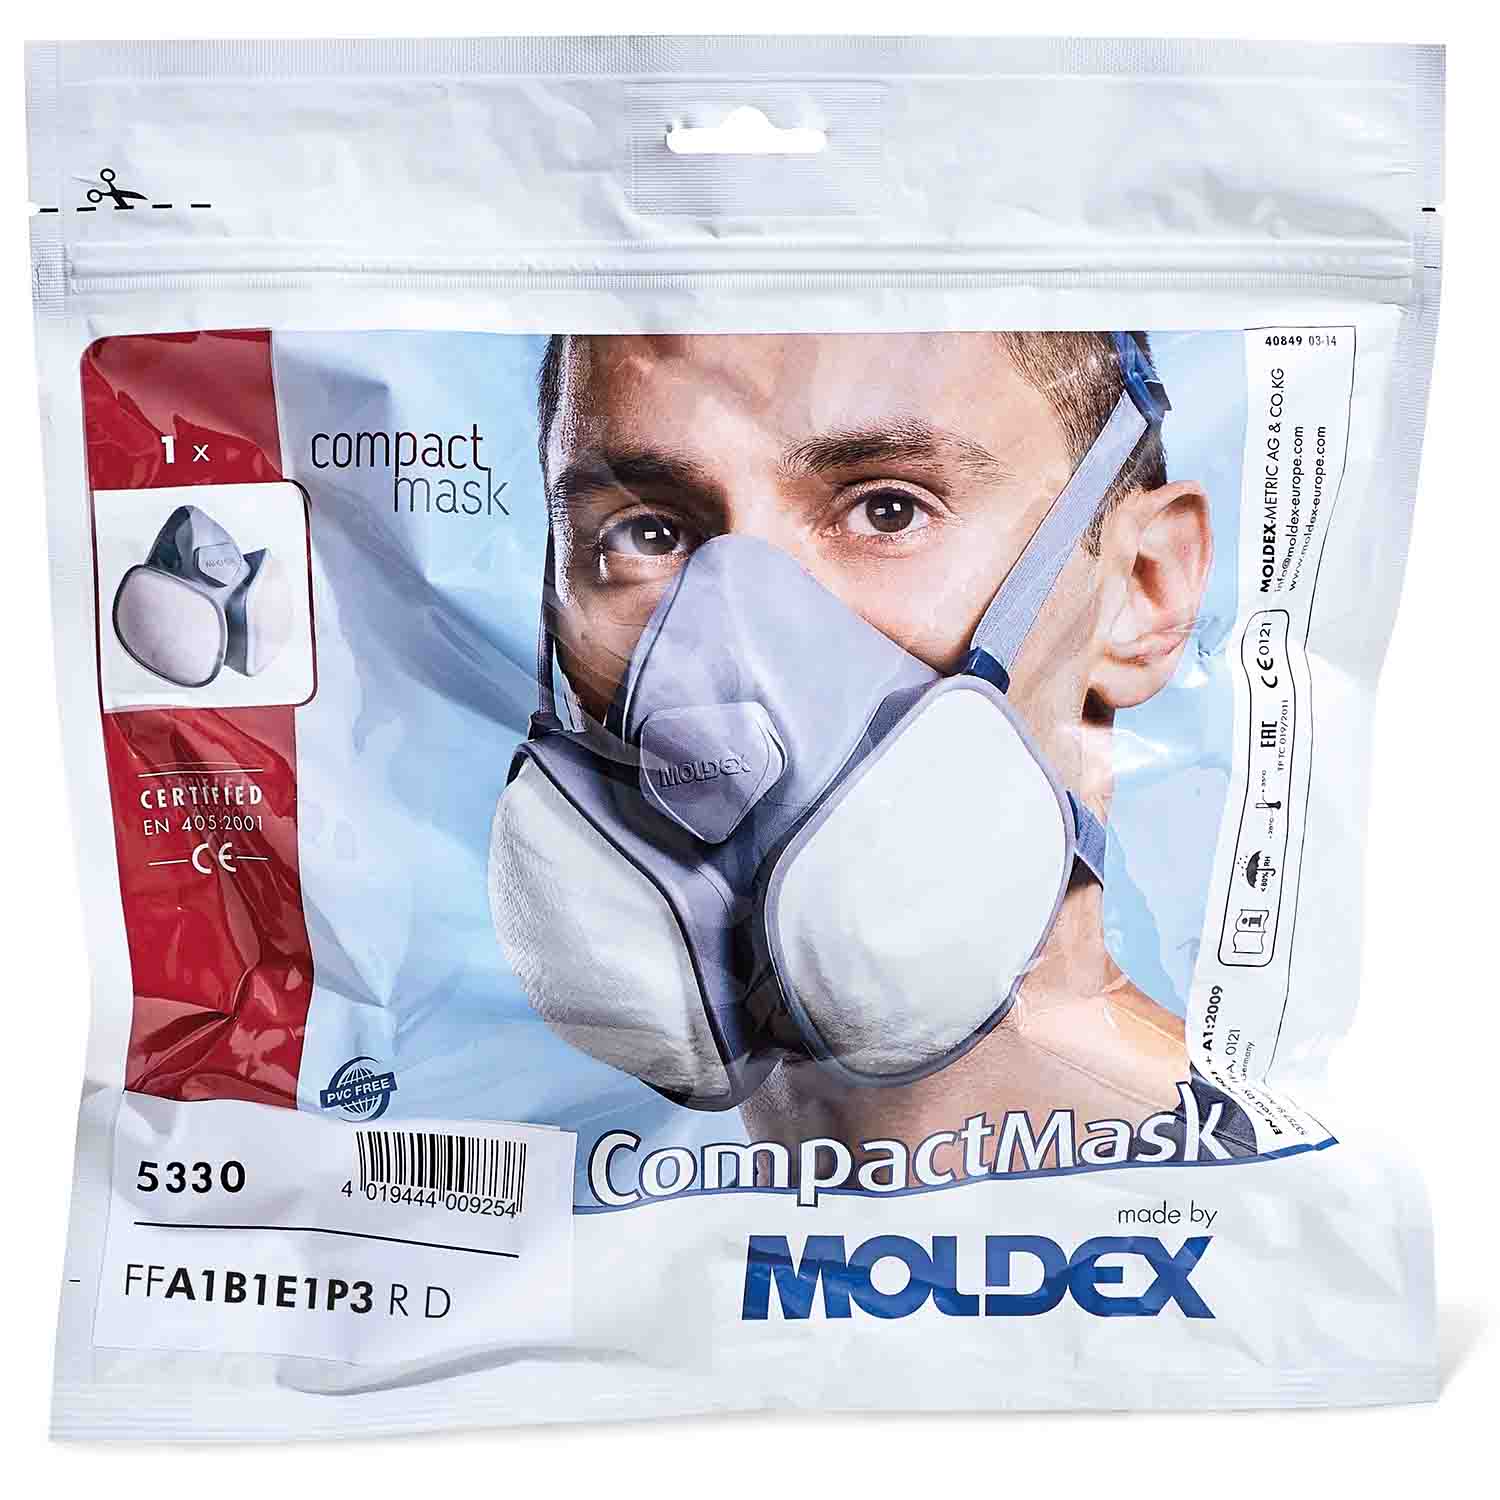 Moldex 5330 ABE1P3 half mask with package